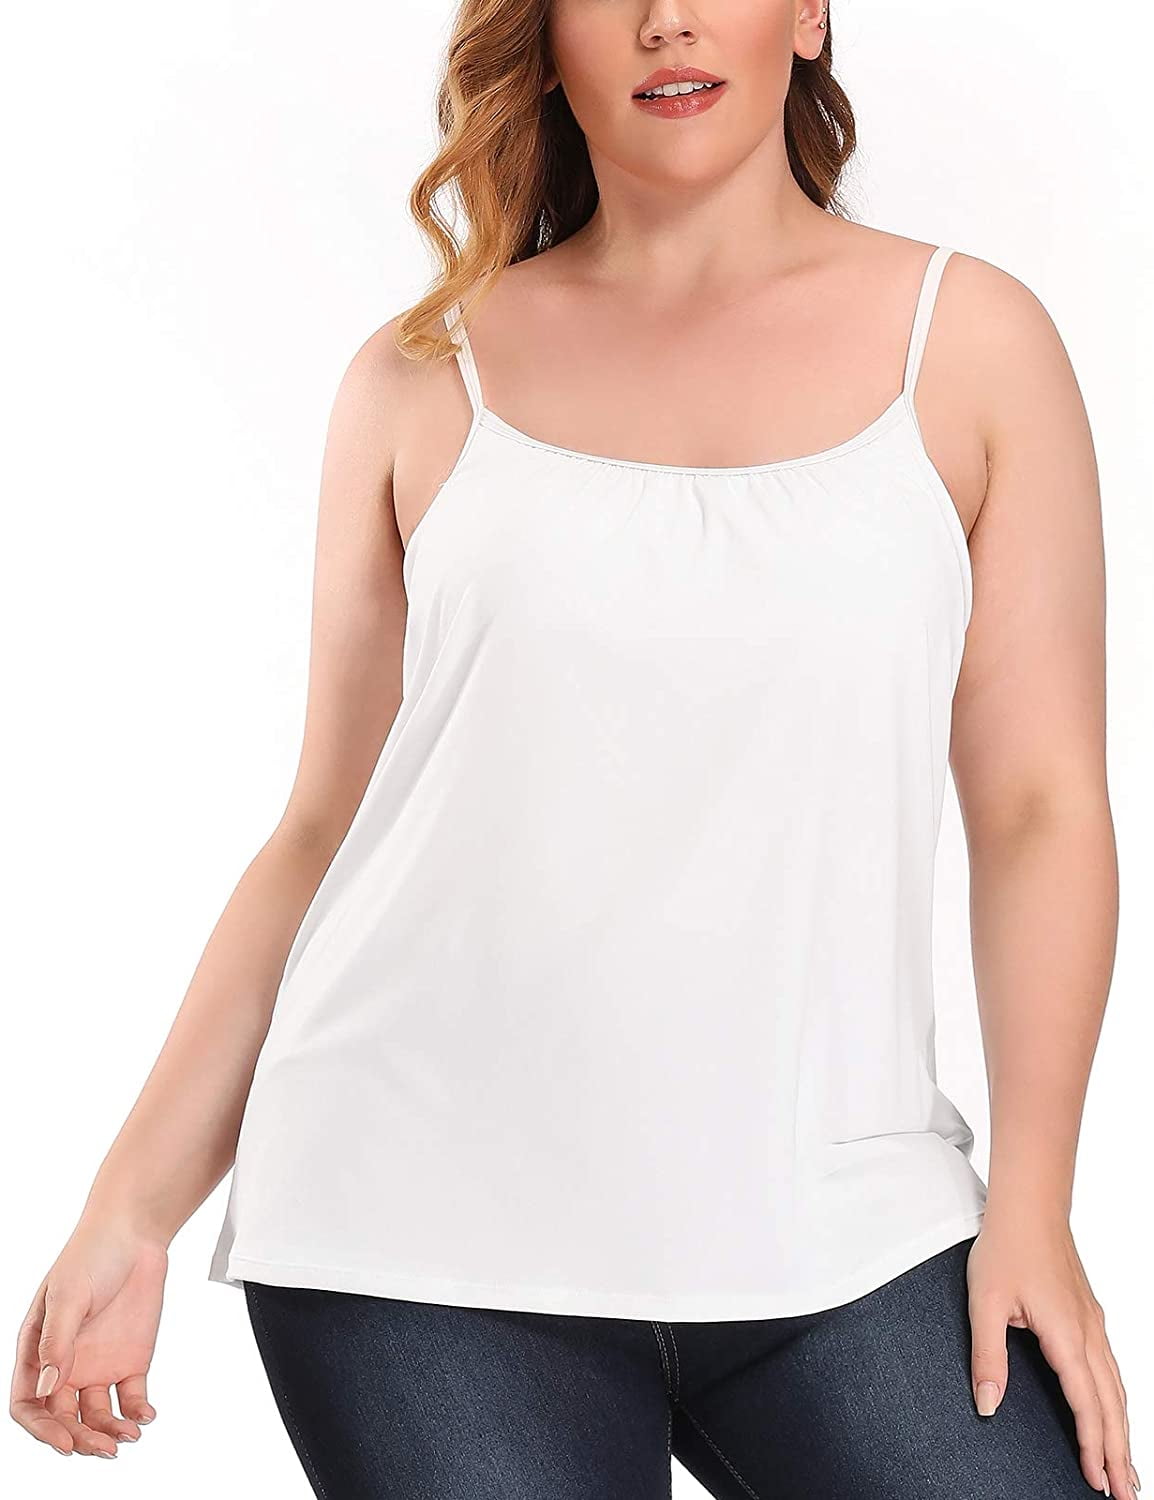 COMFREE Women's Camisole with Built in Bra Plus Size Tank Top Cami Flowy  Casual Tops with Adjustable Strap (S-4XL) 